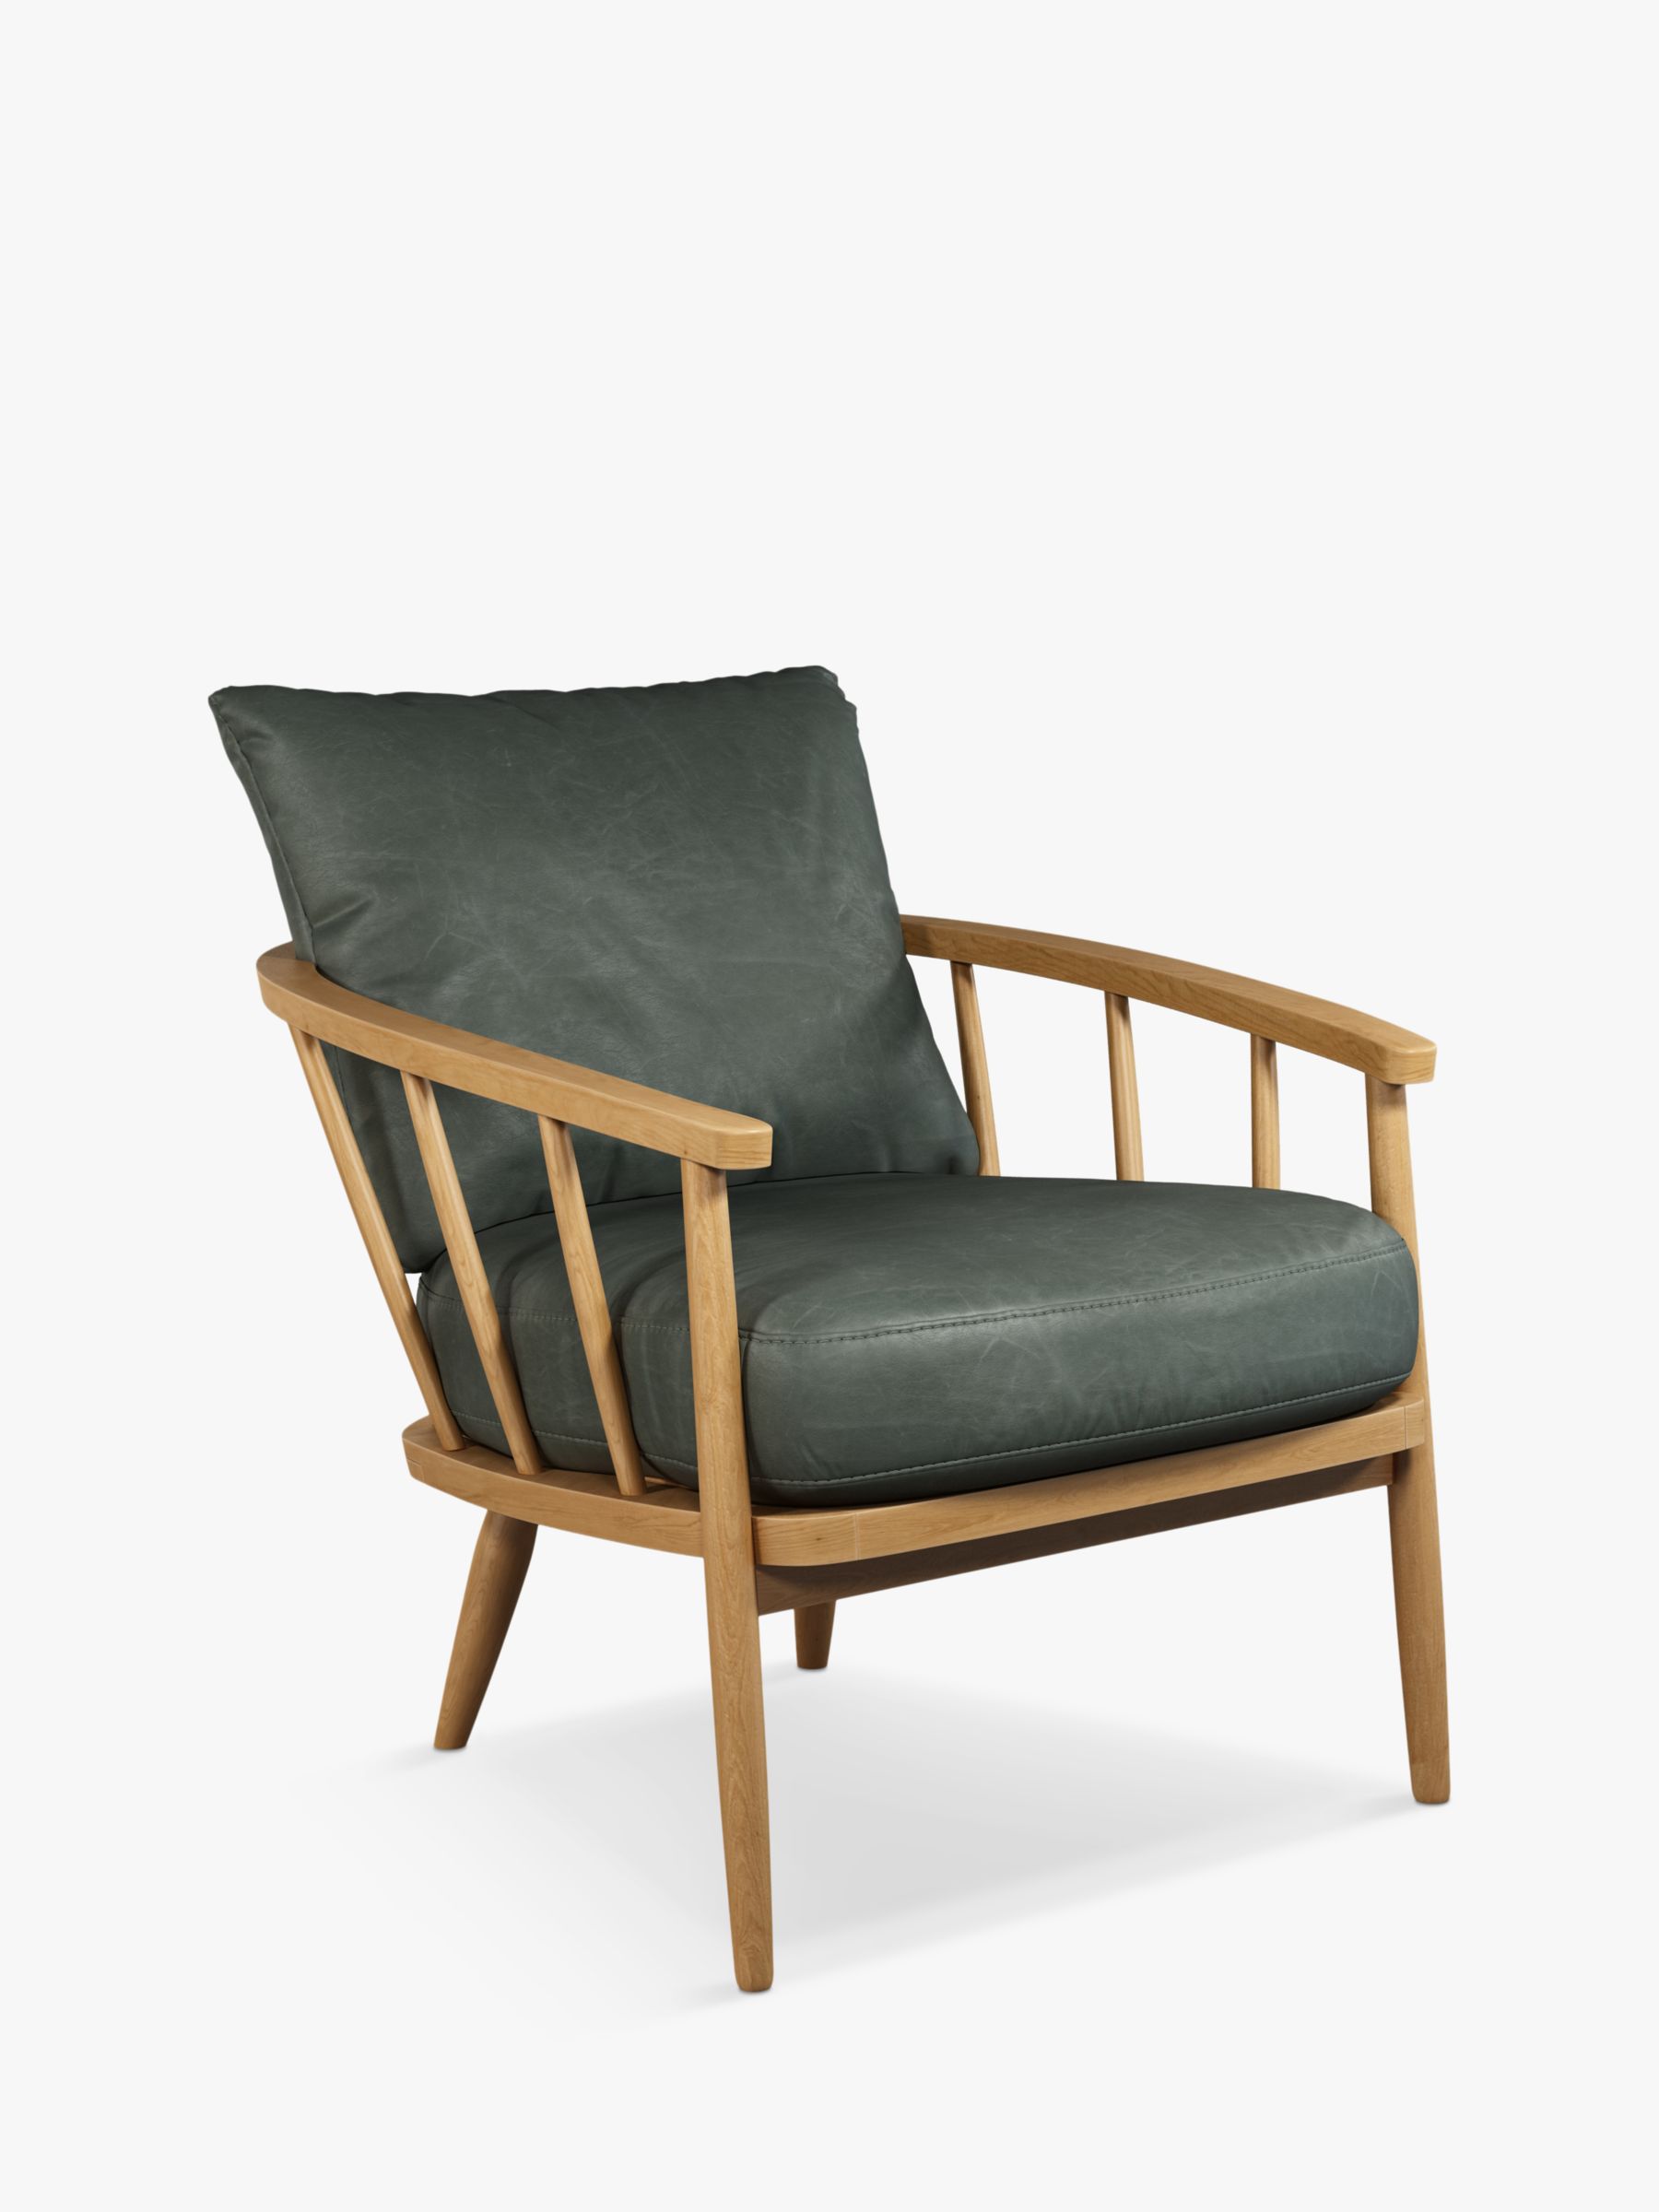 Frome Range, John Lewis Frome Leather Armchair, Light Wood Frame, Sellvagio Green